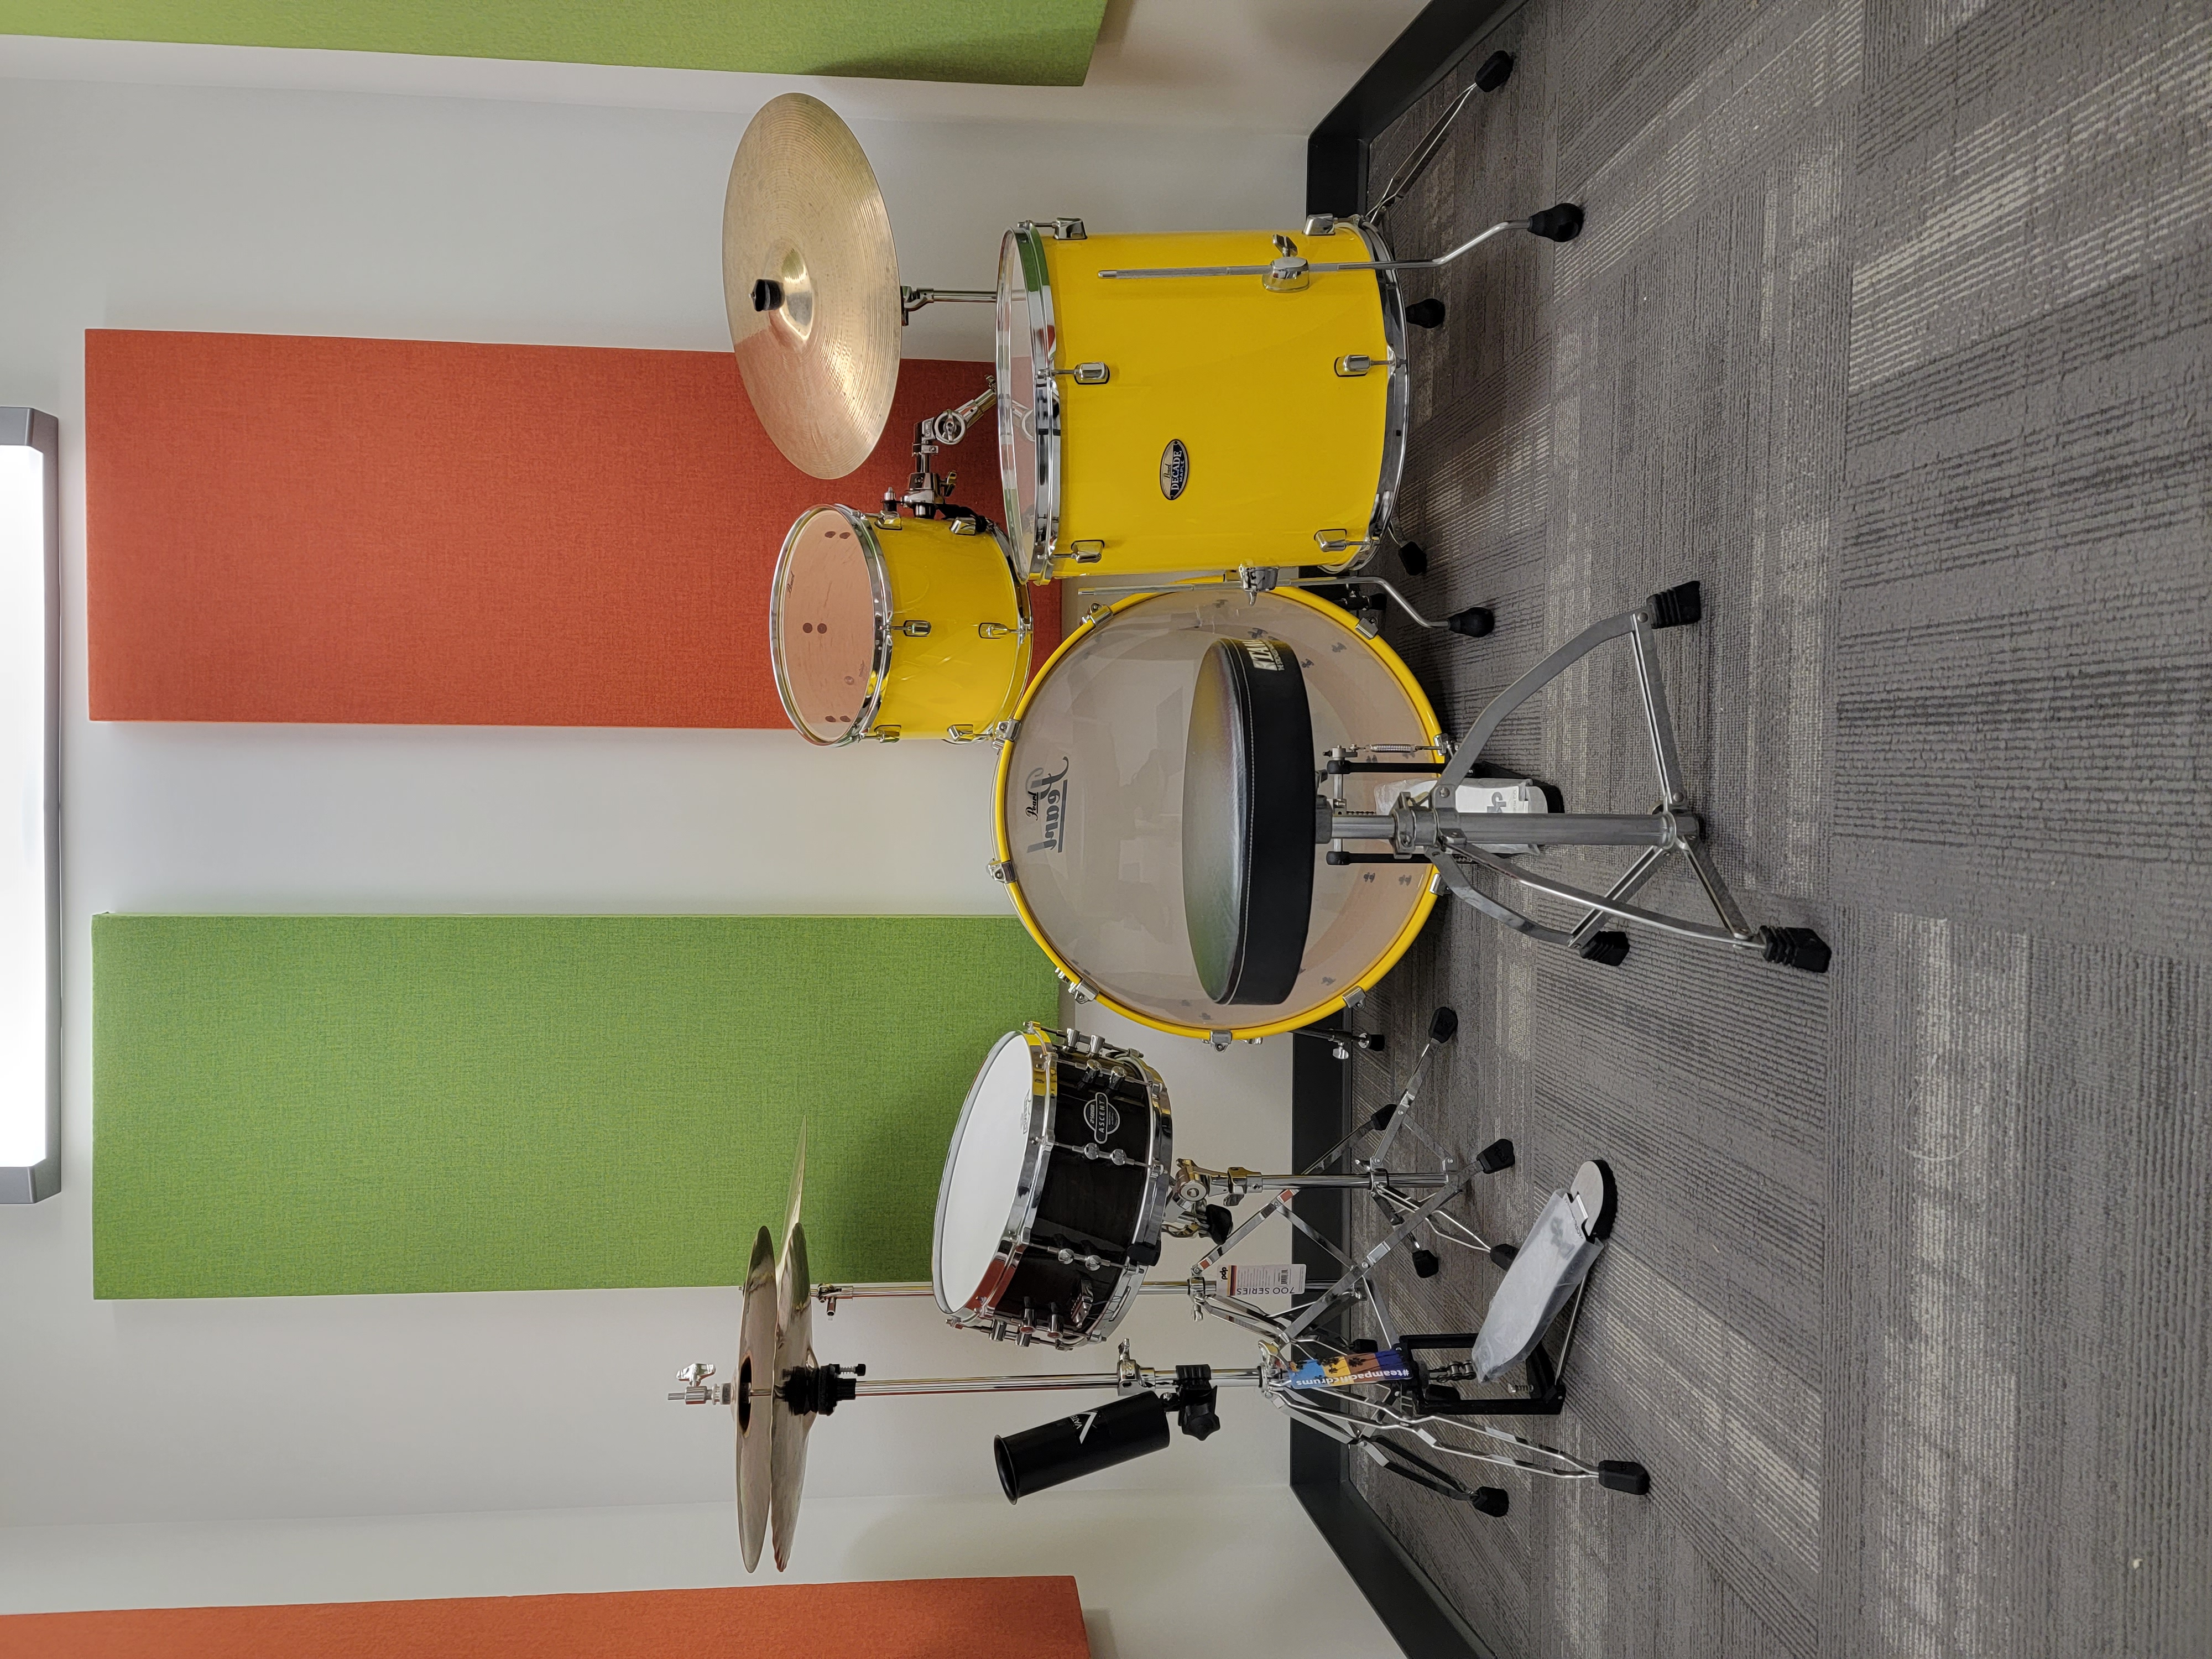 music practice room with yellow drum kit